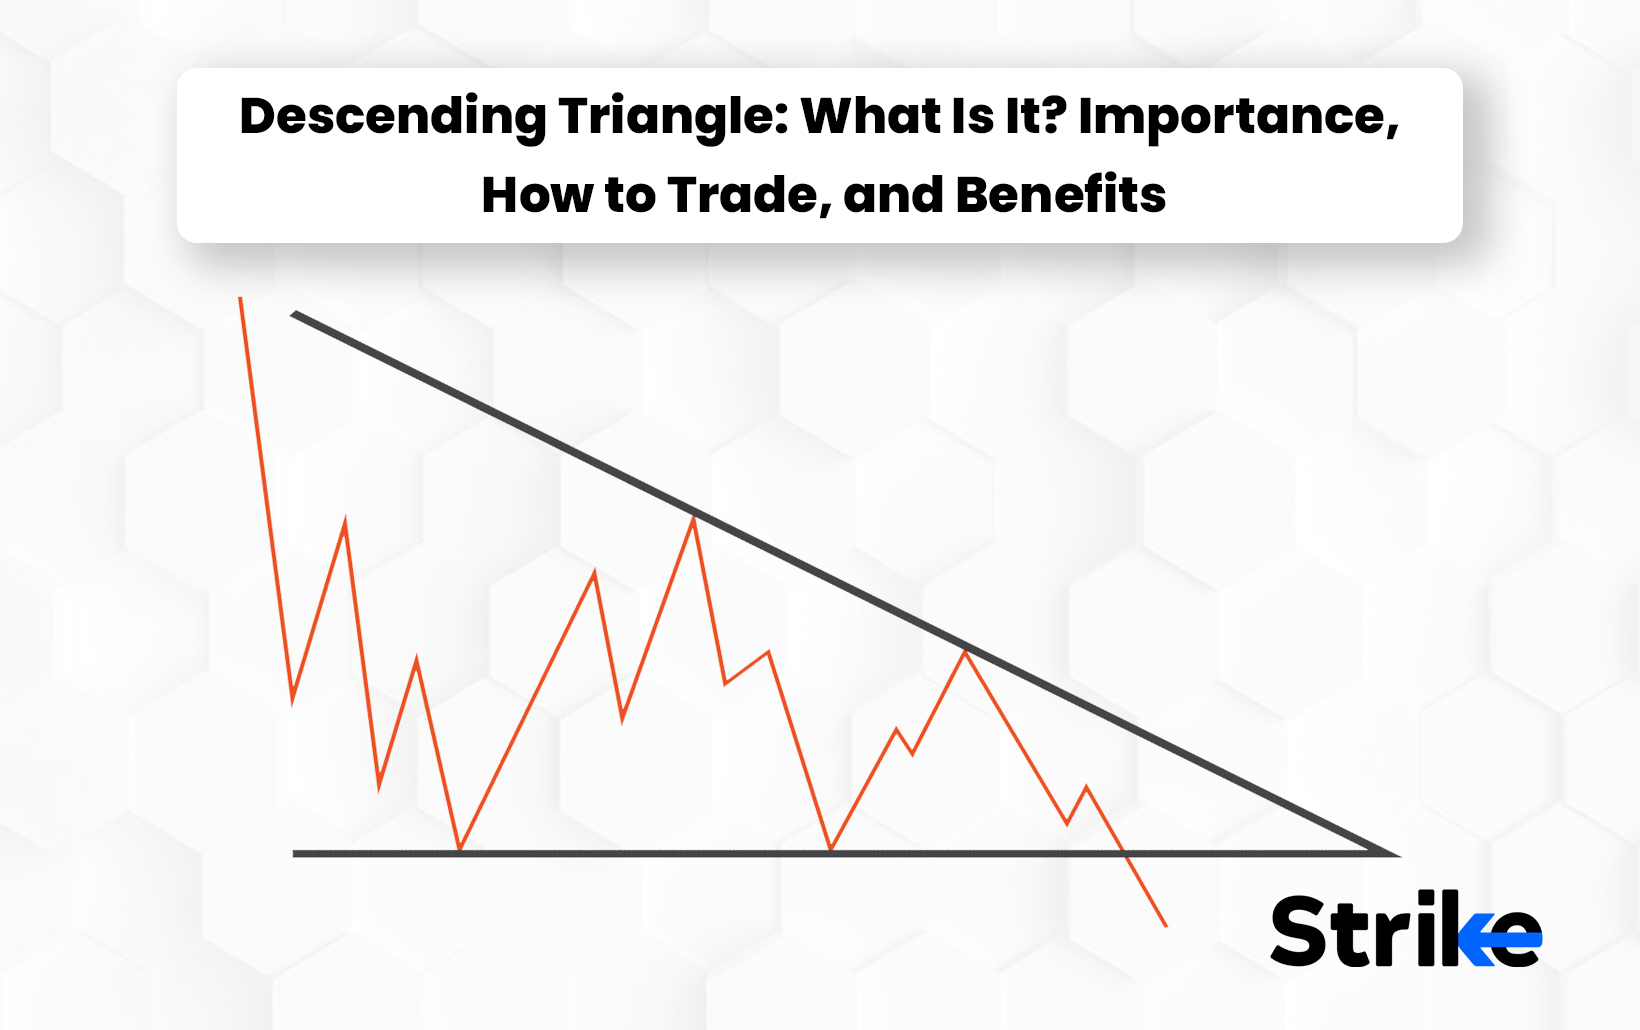 Descending Triangle: What Is It? Importance, How to Trade, and Benefits